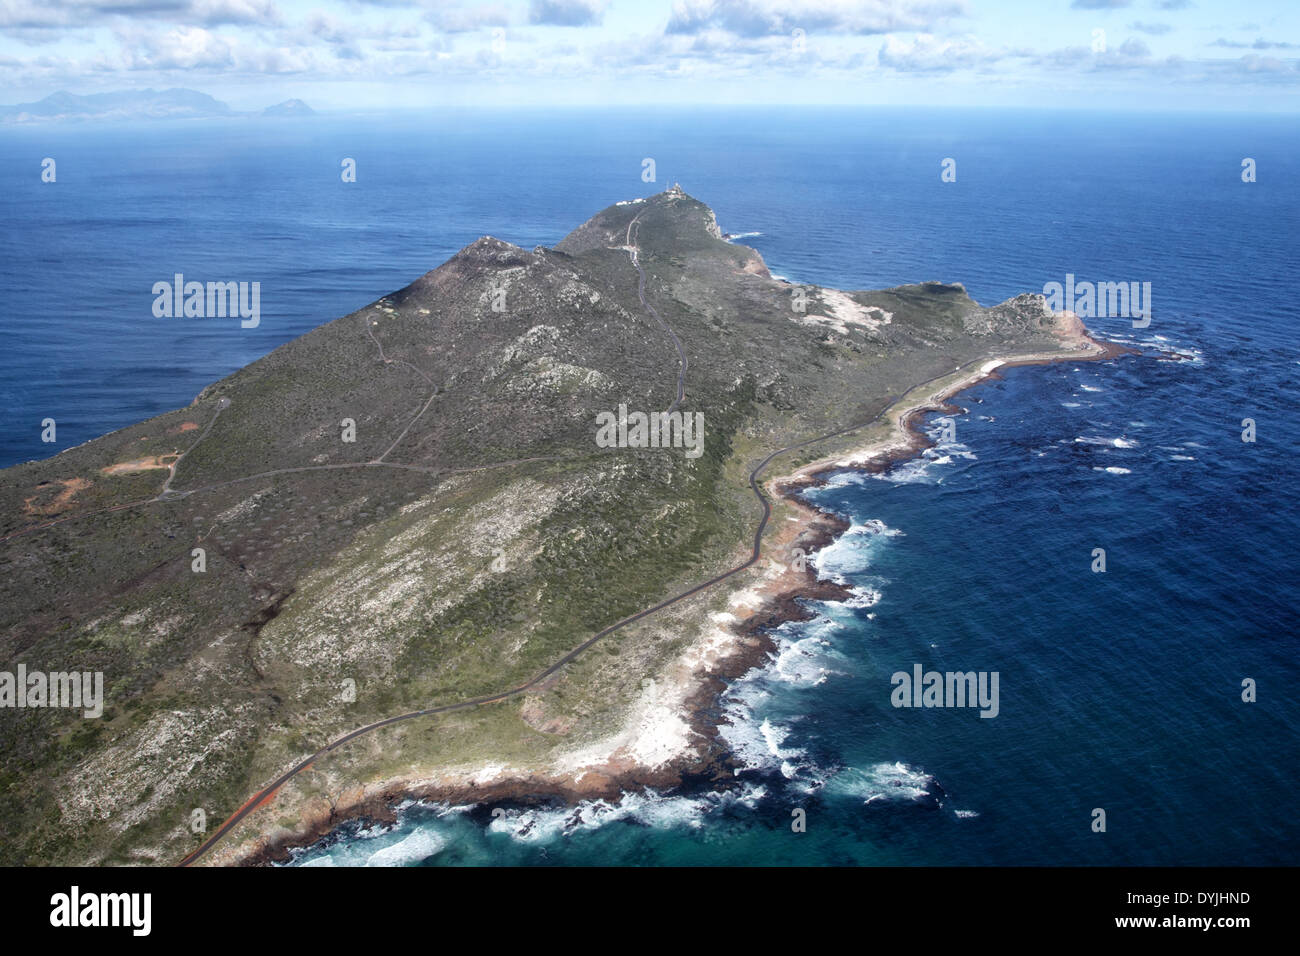 Aerial view of the southern end of the Cape Peninsula near Cape Town, South Africa, with Cape of Good Hope and Cape Point. Stock Photo